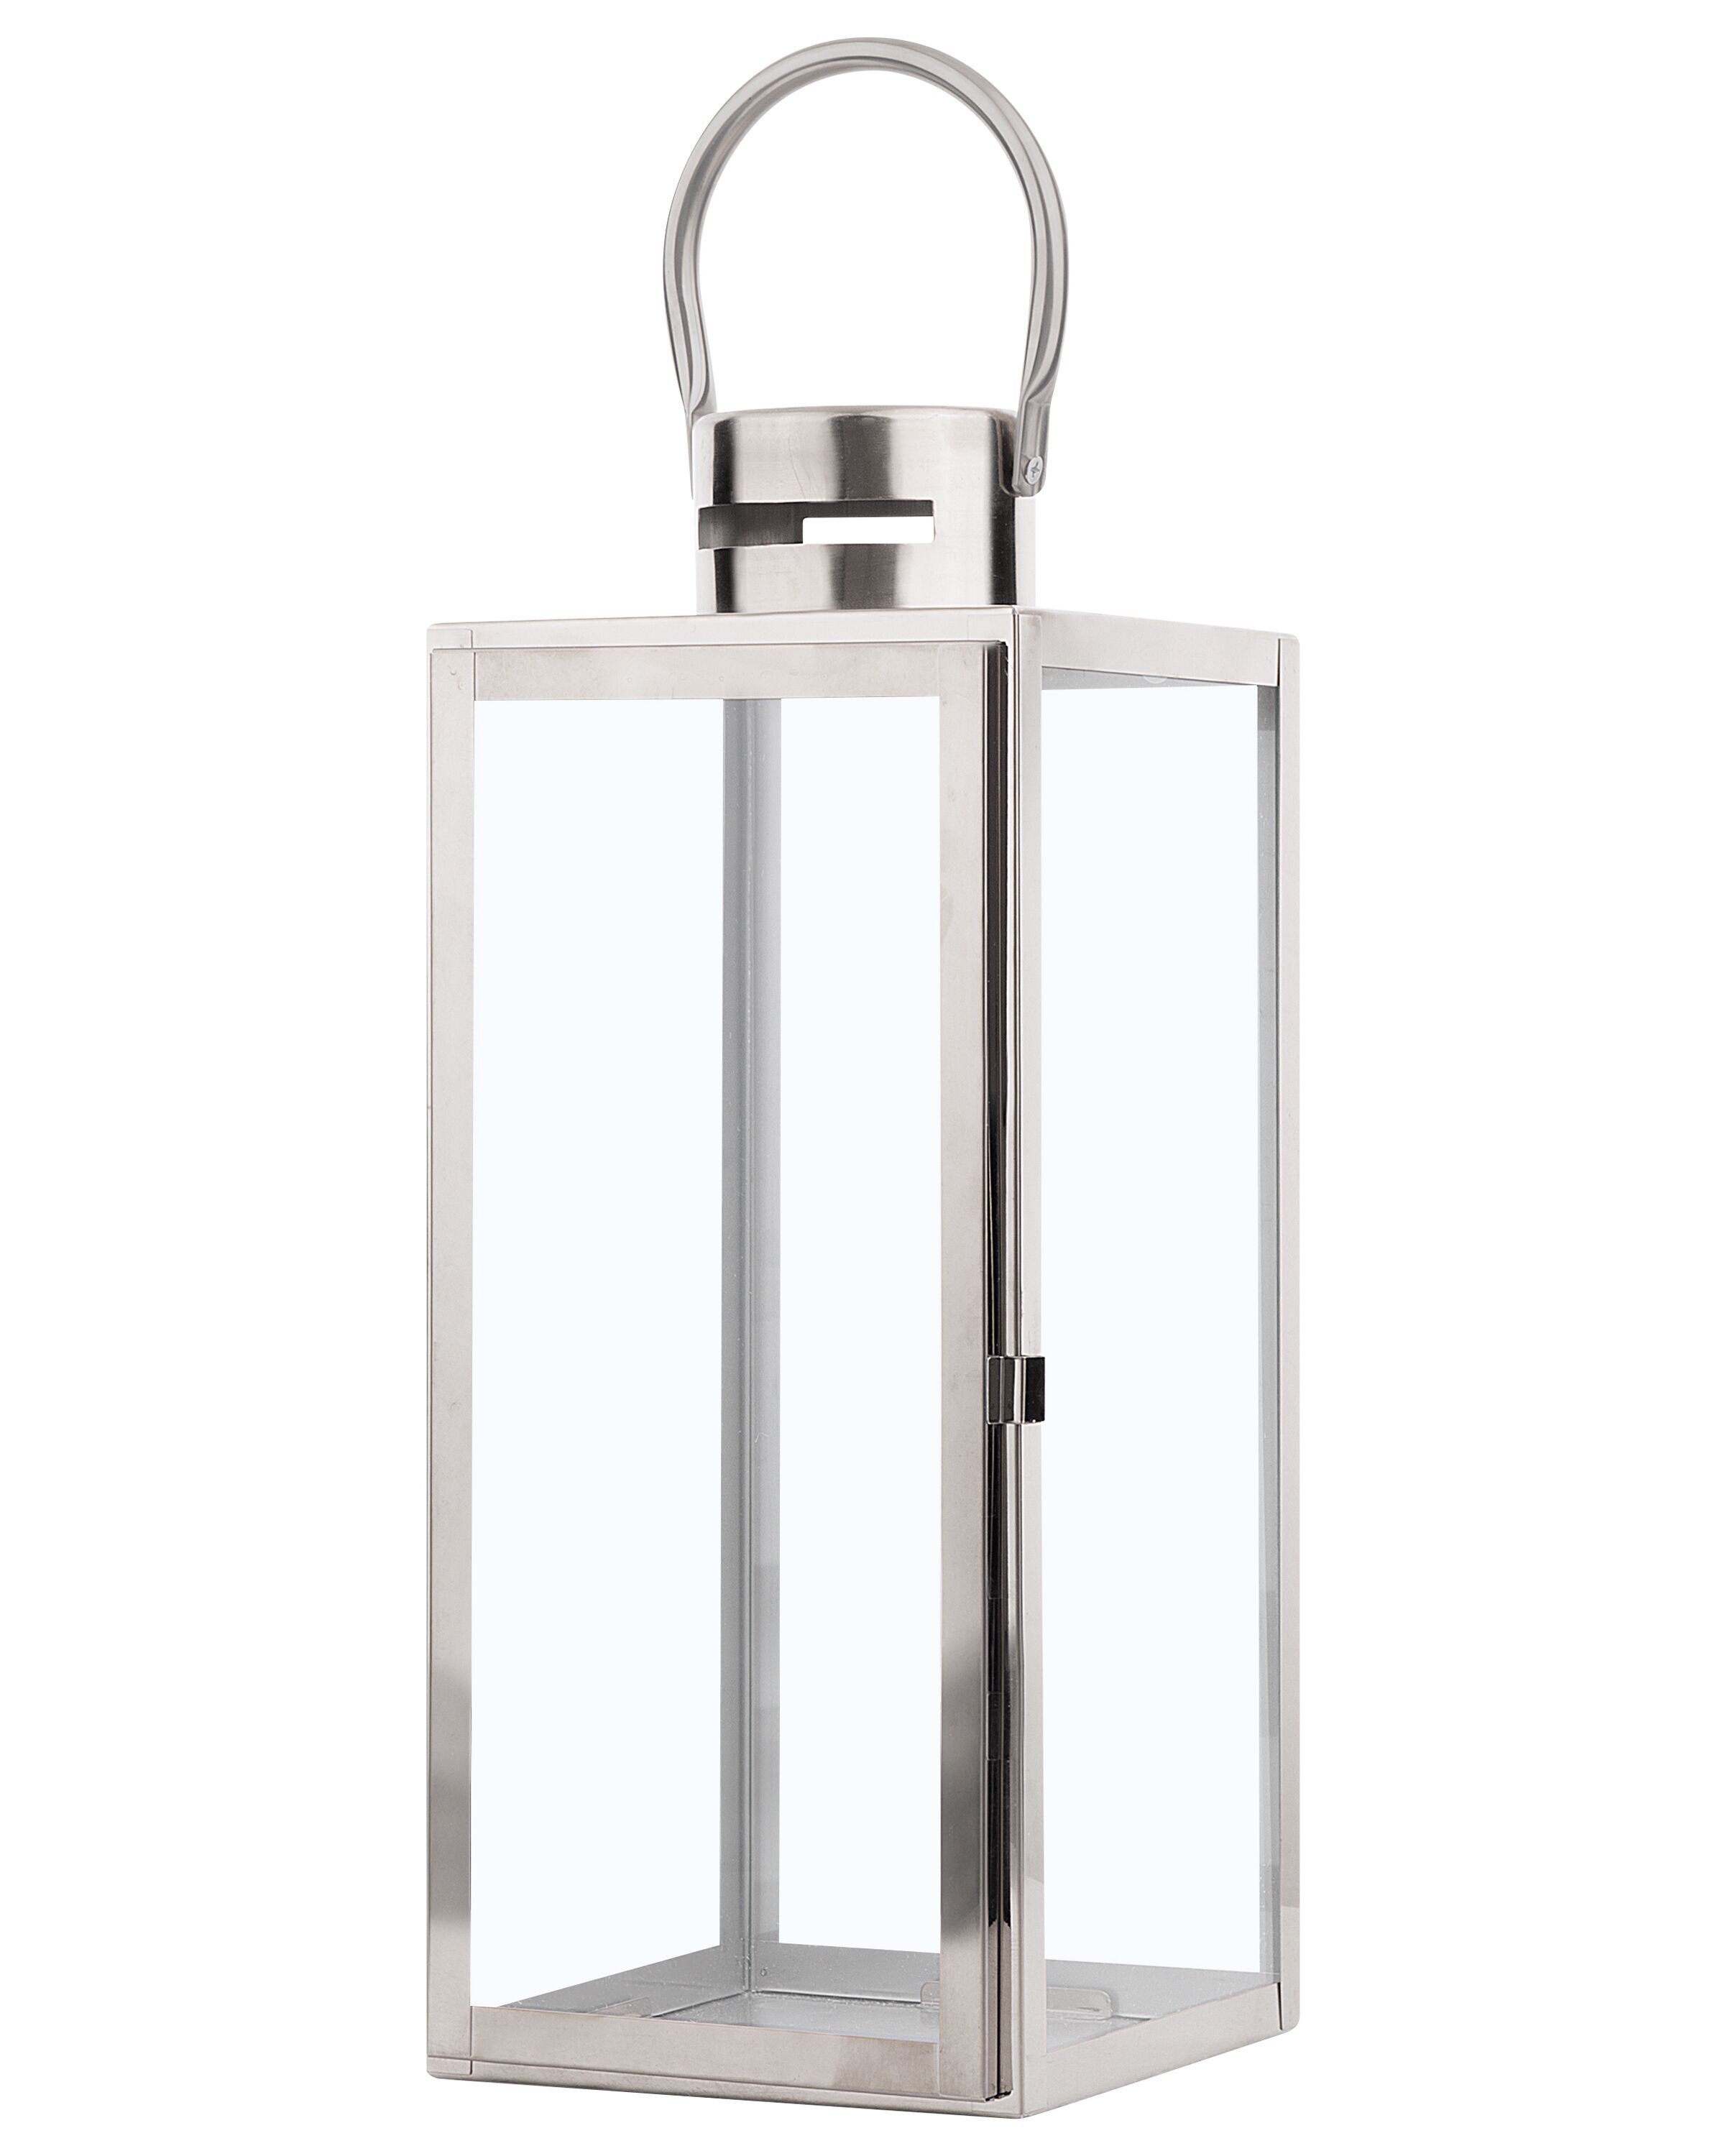 Modern Lantern Candle holder Stainless Steel & Glass in Silver Height 35 cm 